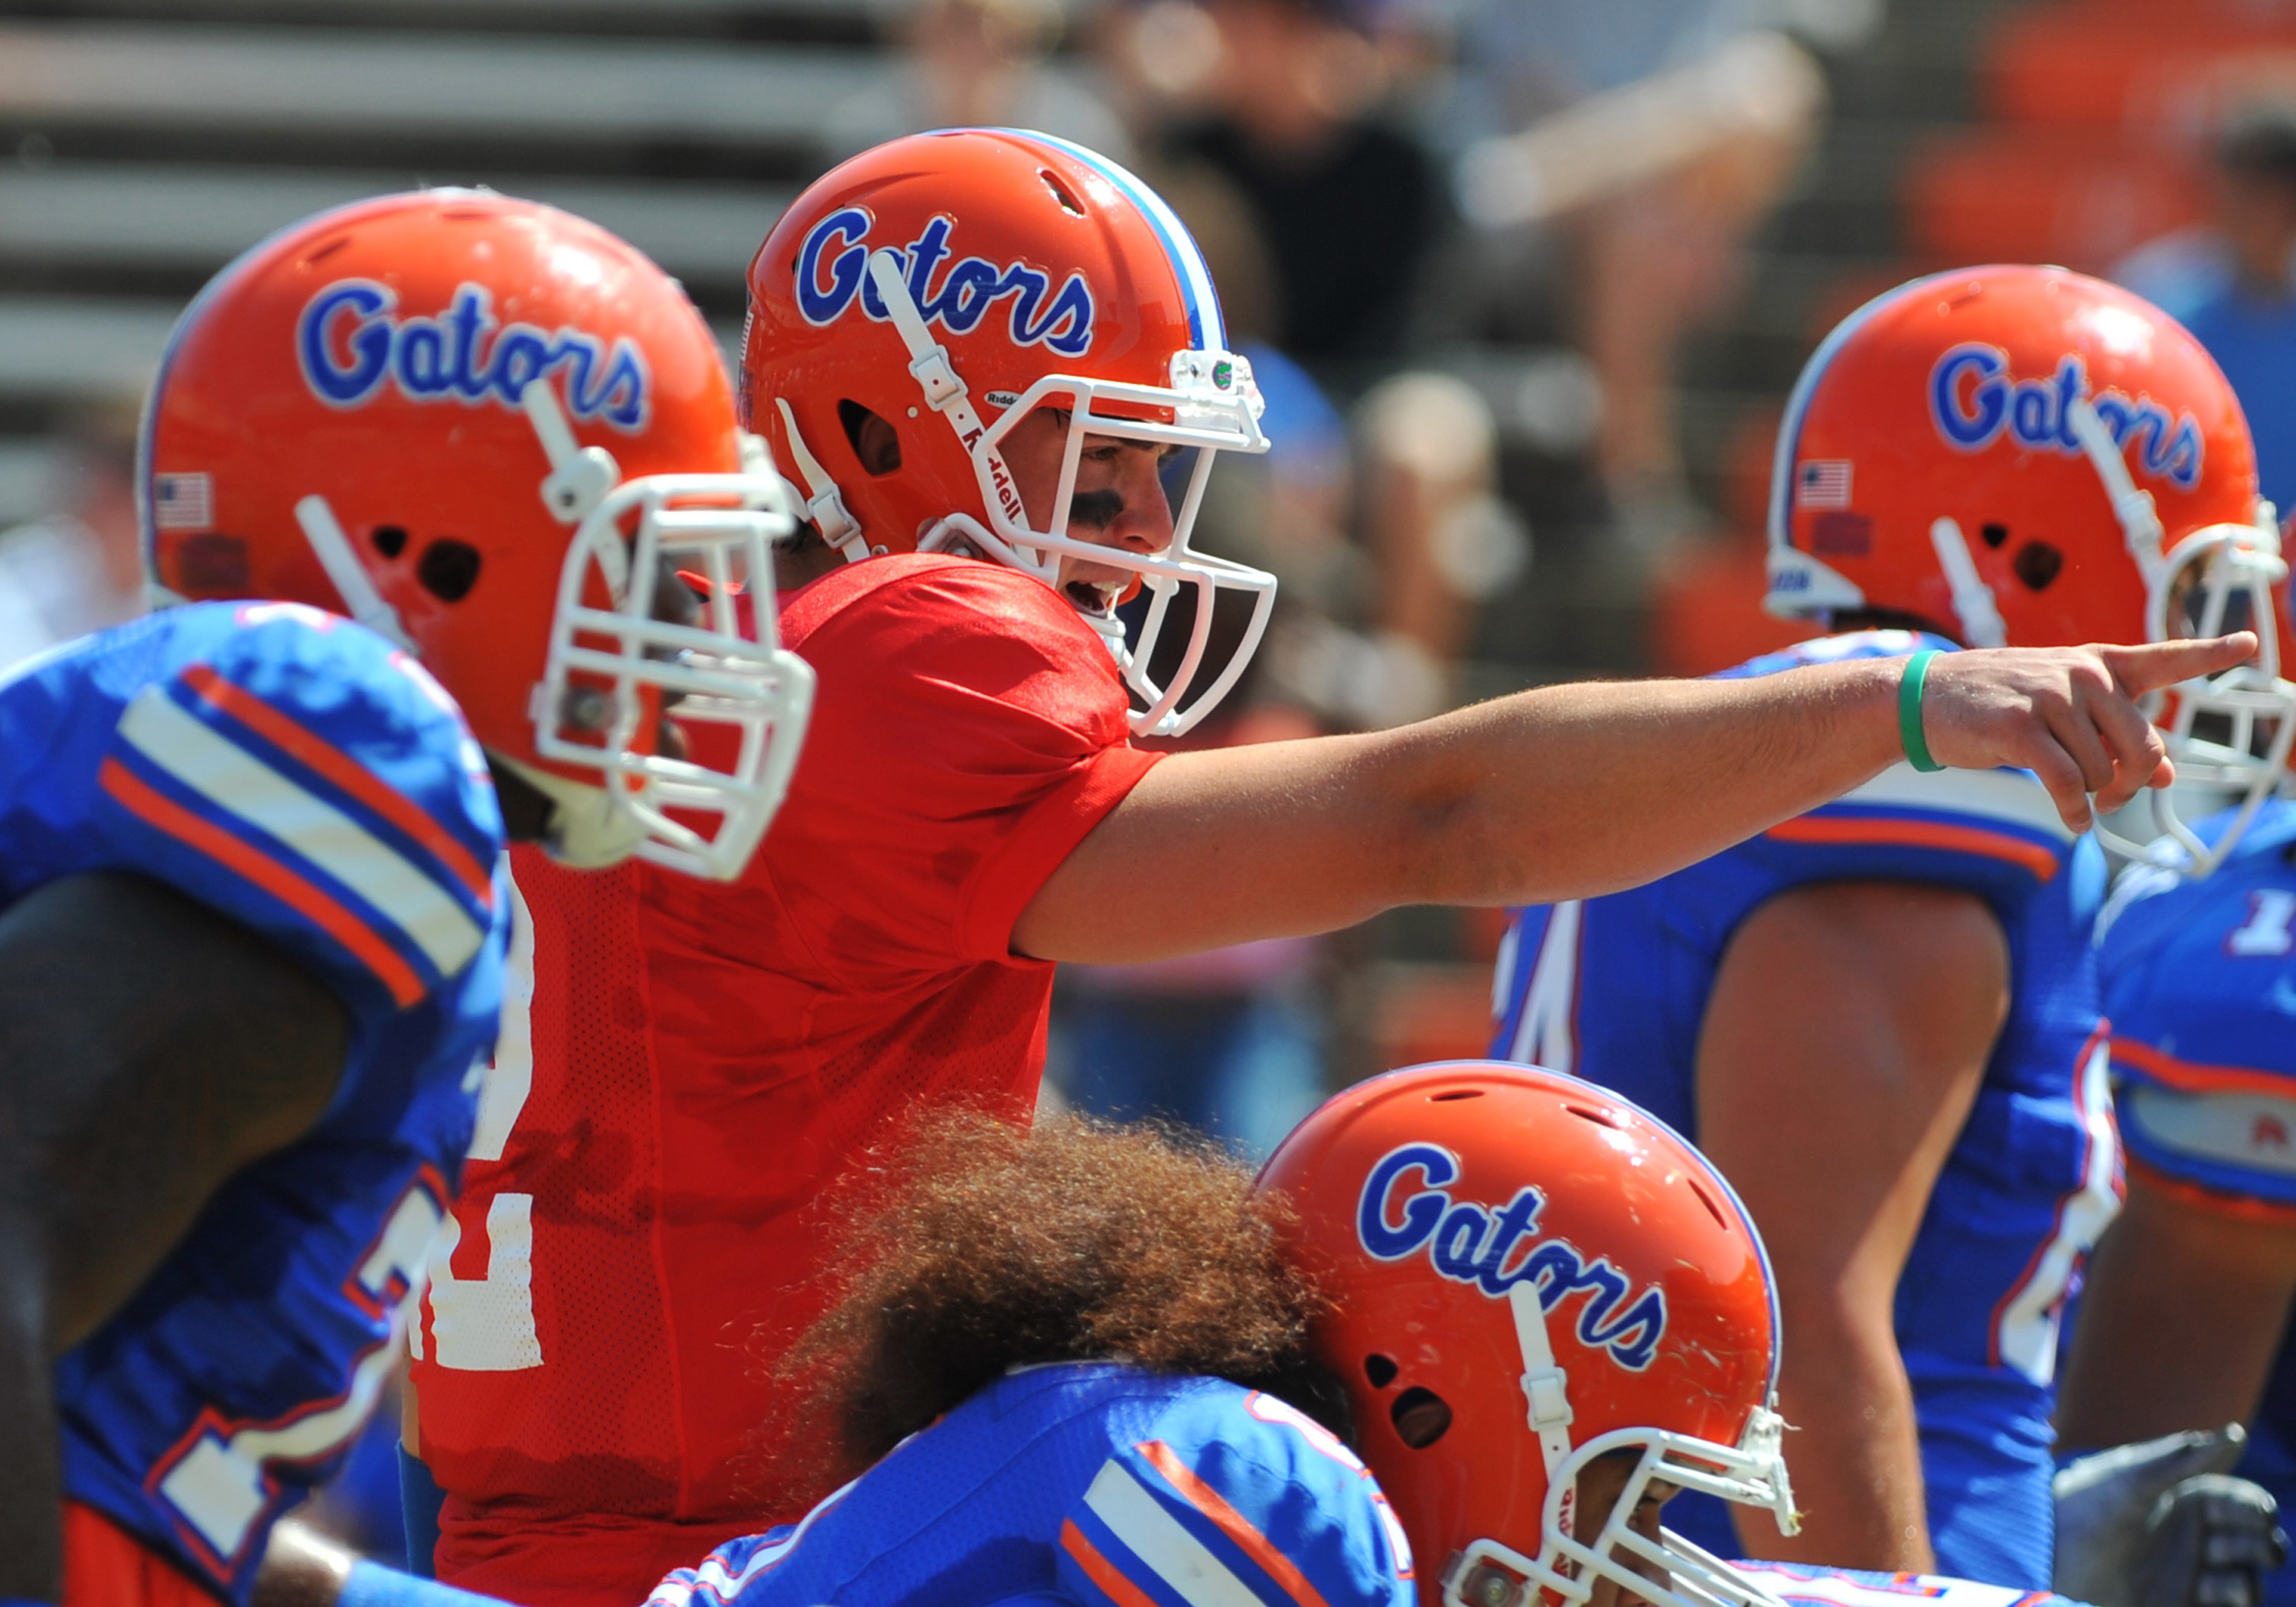 GAINESVILLE, FL - APRIL 9:  Quarterback John Brantley #12 of the Florida Gators directs play the Orange and Blue spring football game April 9, 2011 at Ben Hill Griffin Stadium in Gainesville, Florida.  (Photo by Al Messerschmidt/Getty Images)